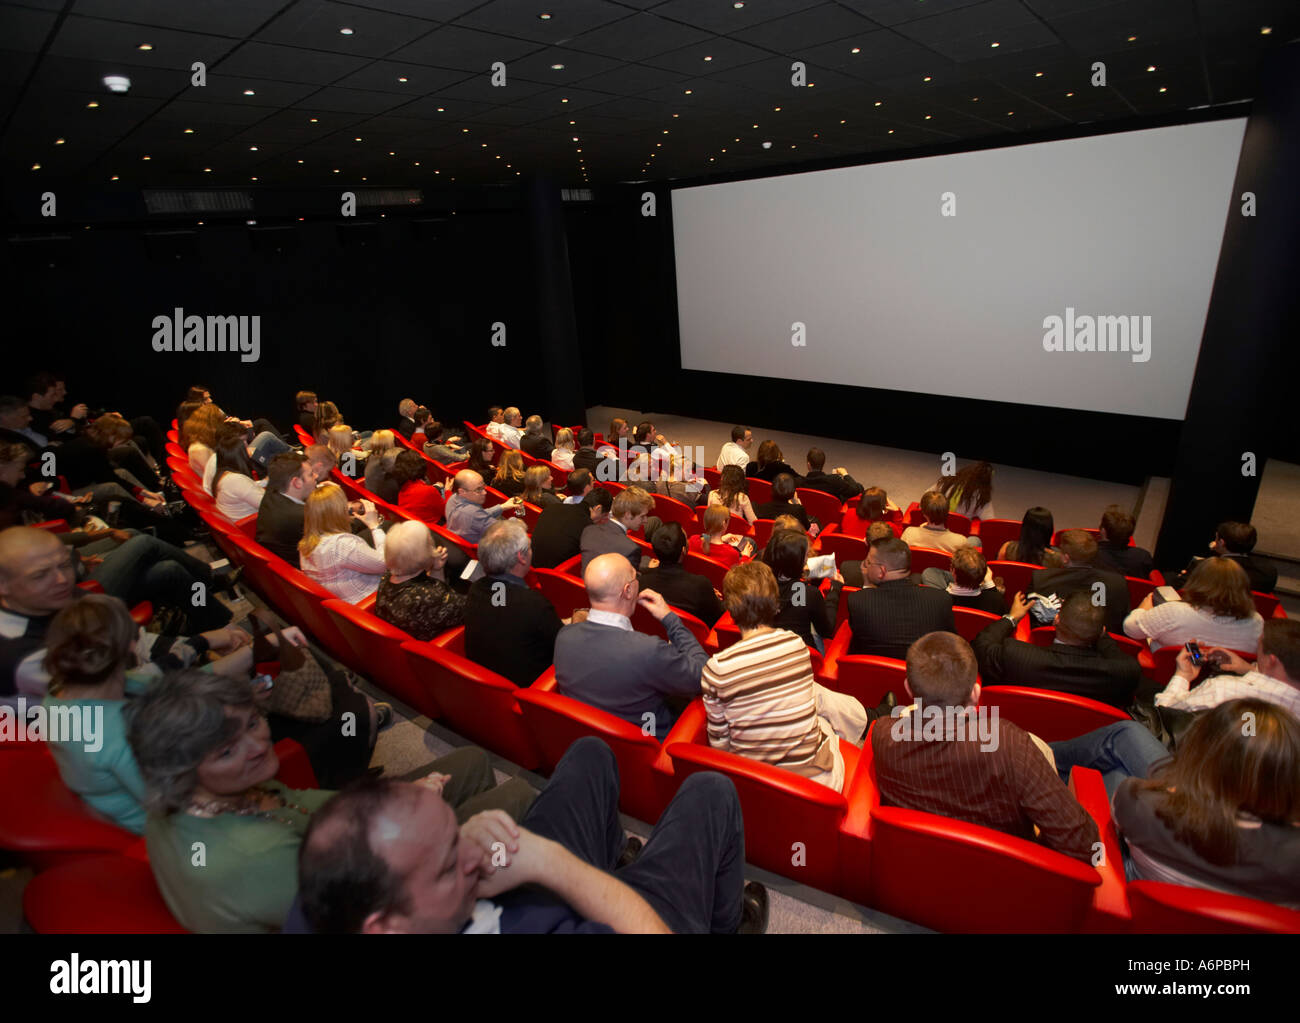 people watching a cinema screen in a theatre Stock Photo